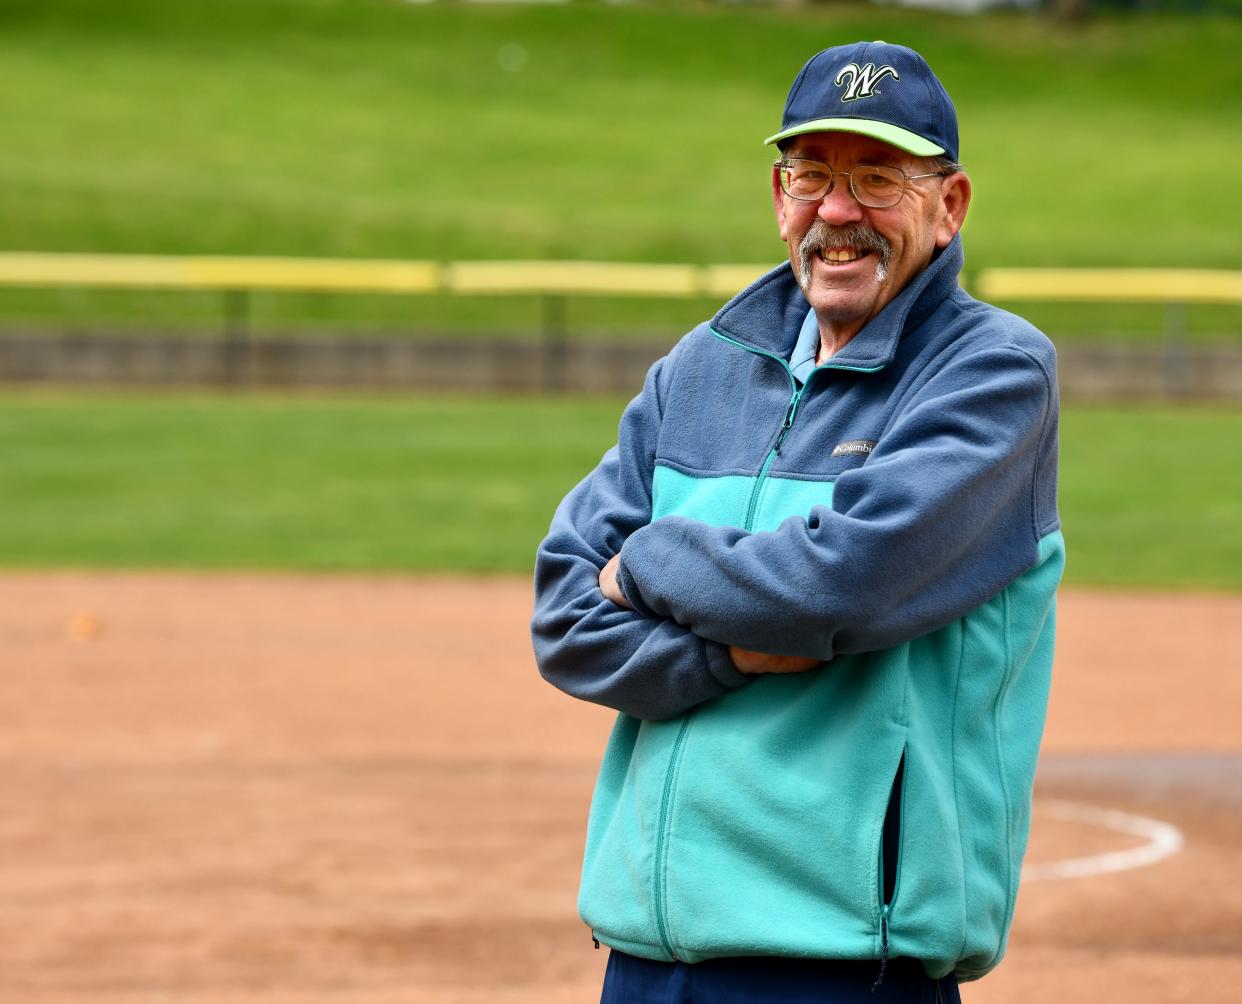 After dedicating his life to promote youth baseball and softball in Worcester, Bob Rousseau is being honored by having the softball field at Vernon Hill named in his honor on Sunday.